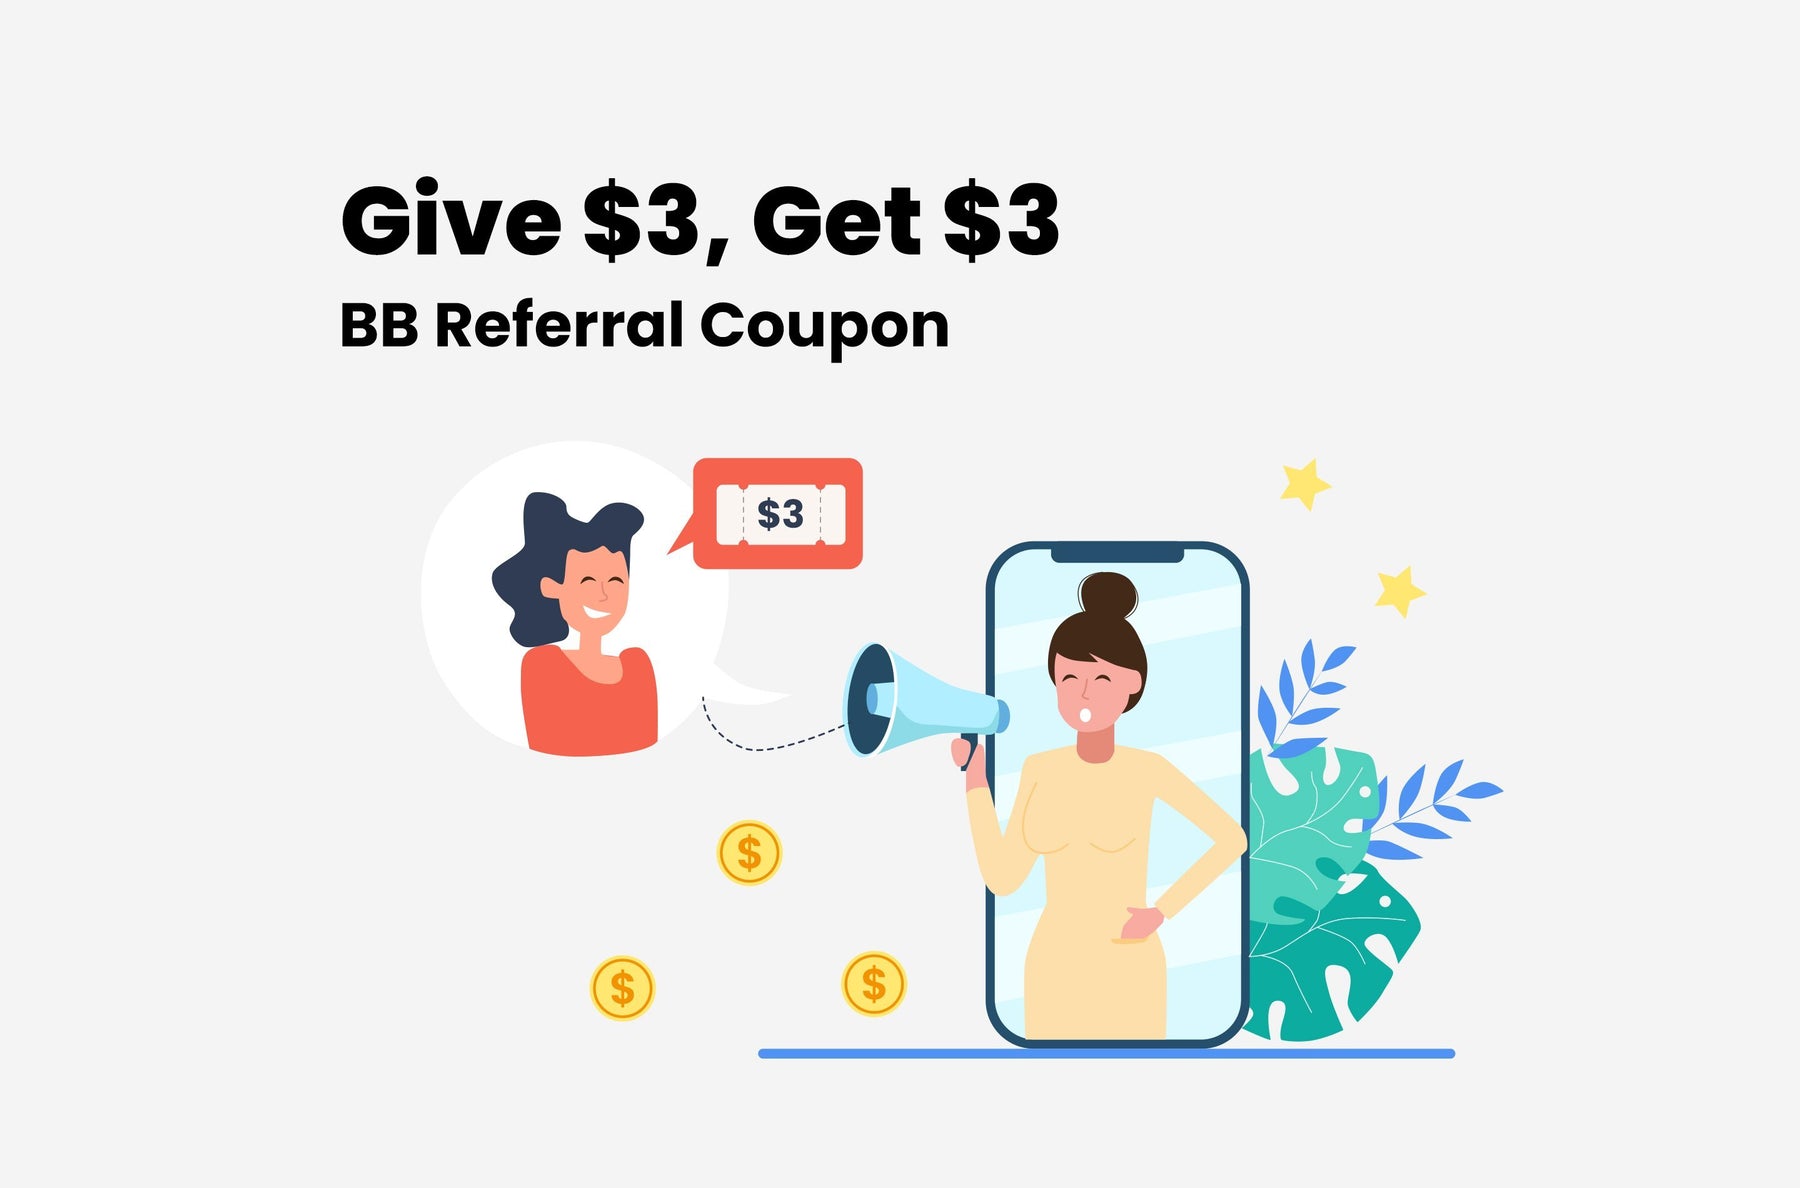 $3 Referral Coupon: How to Redeem